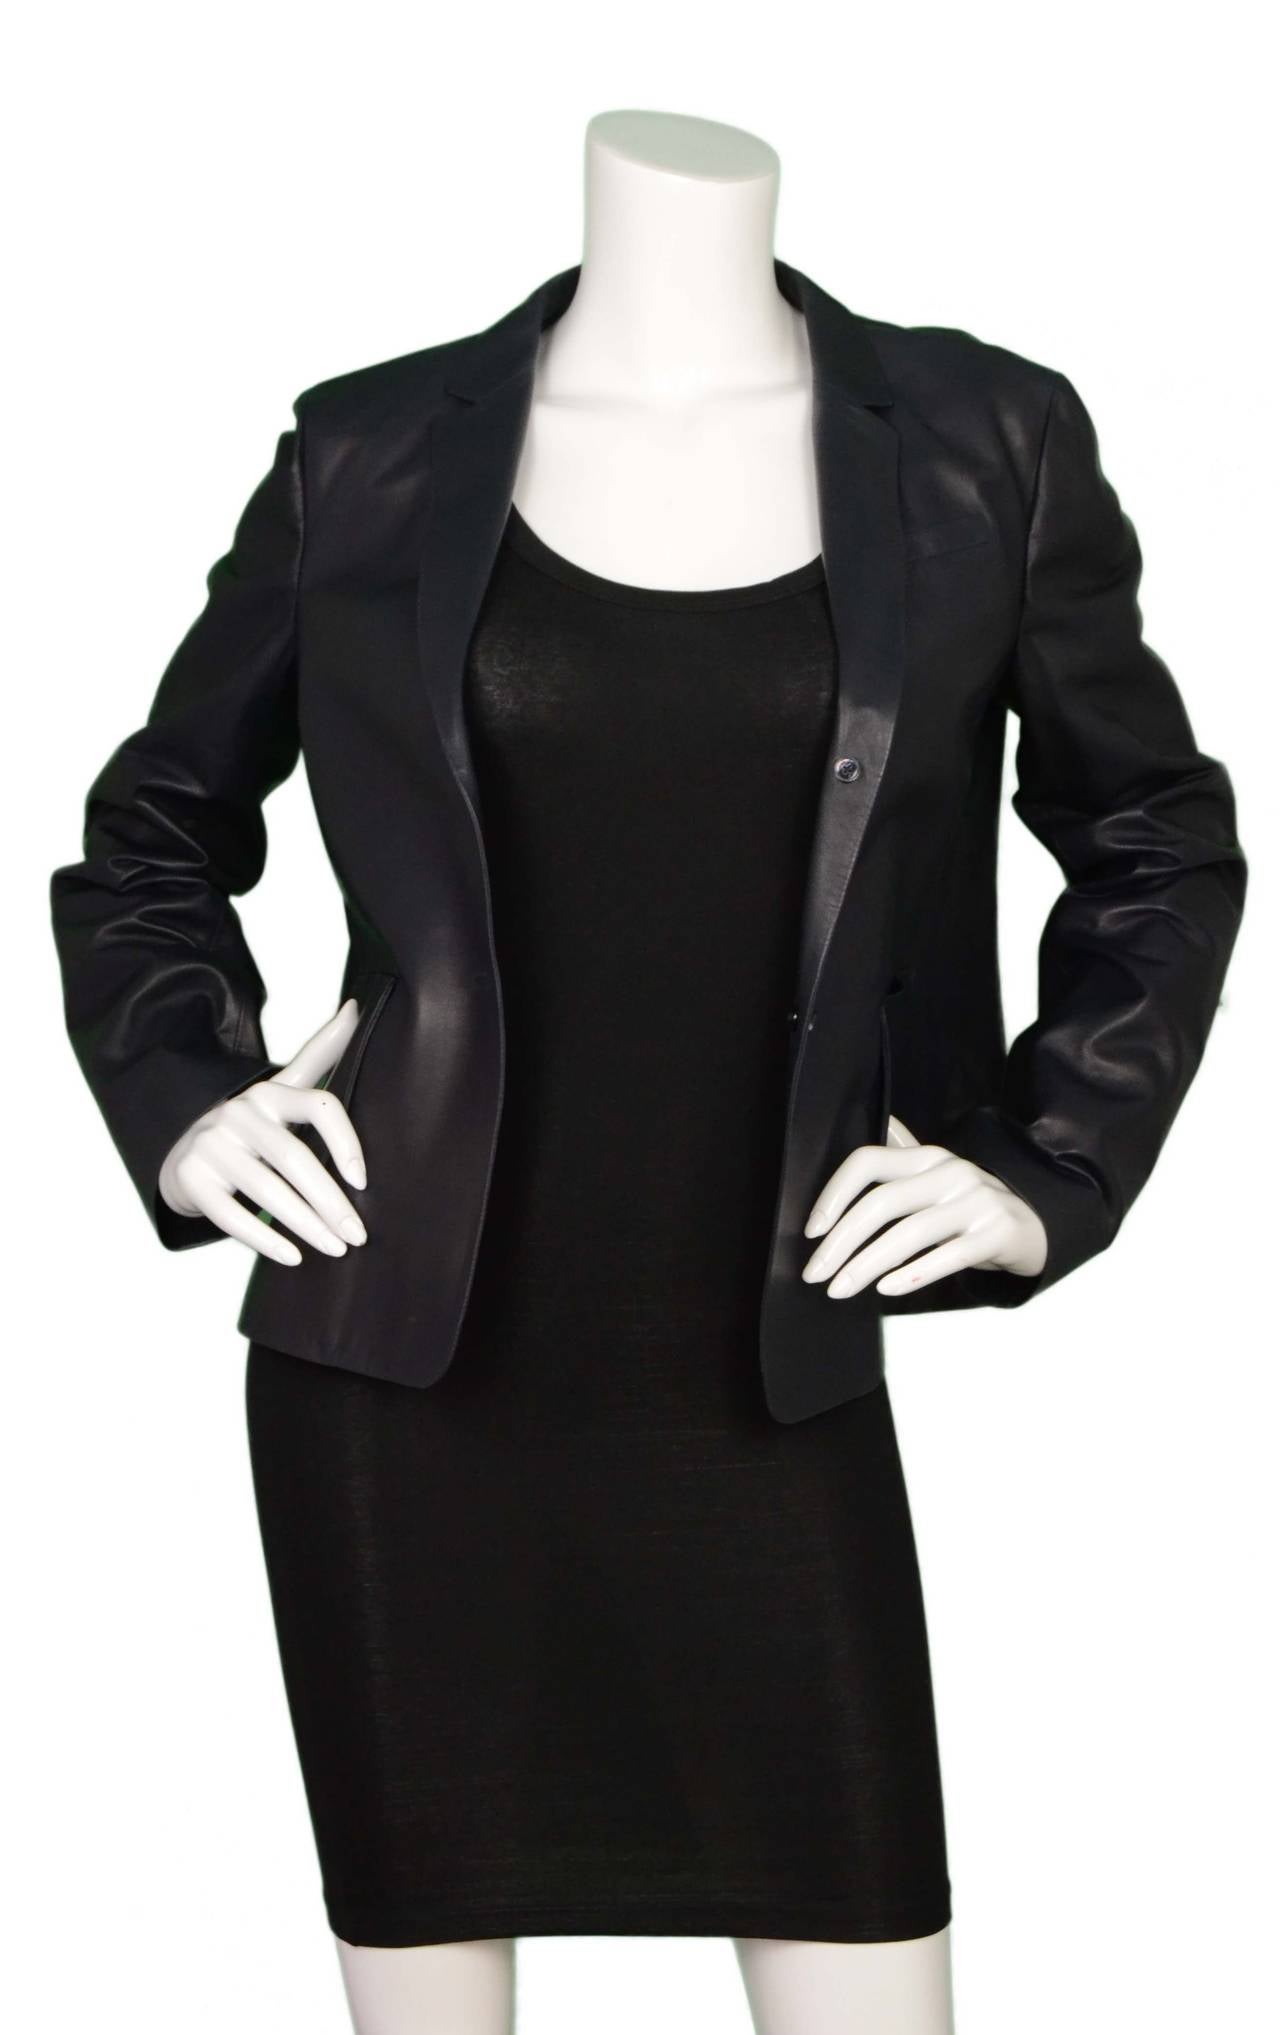 Jil Sander Black LeatherJacket
Made In: Italy
Color: Black
Composition: 100% leather
Lining: Black, 100% cotton
Closure/Opening: Double button down front
Exterior Pockets: Two hip patch pockets
Interior Pockets: None
Overall Condition: